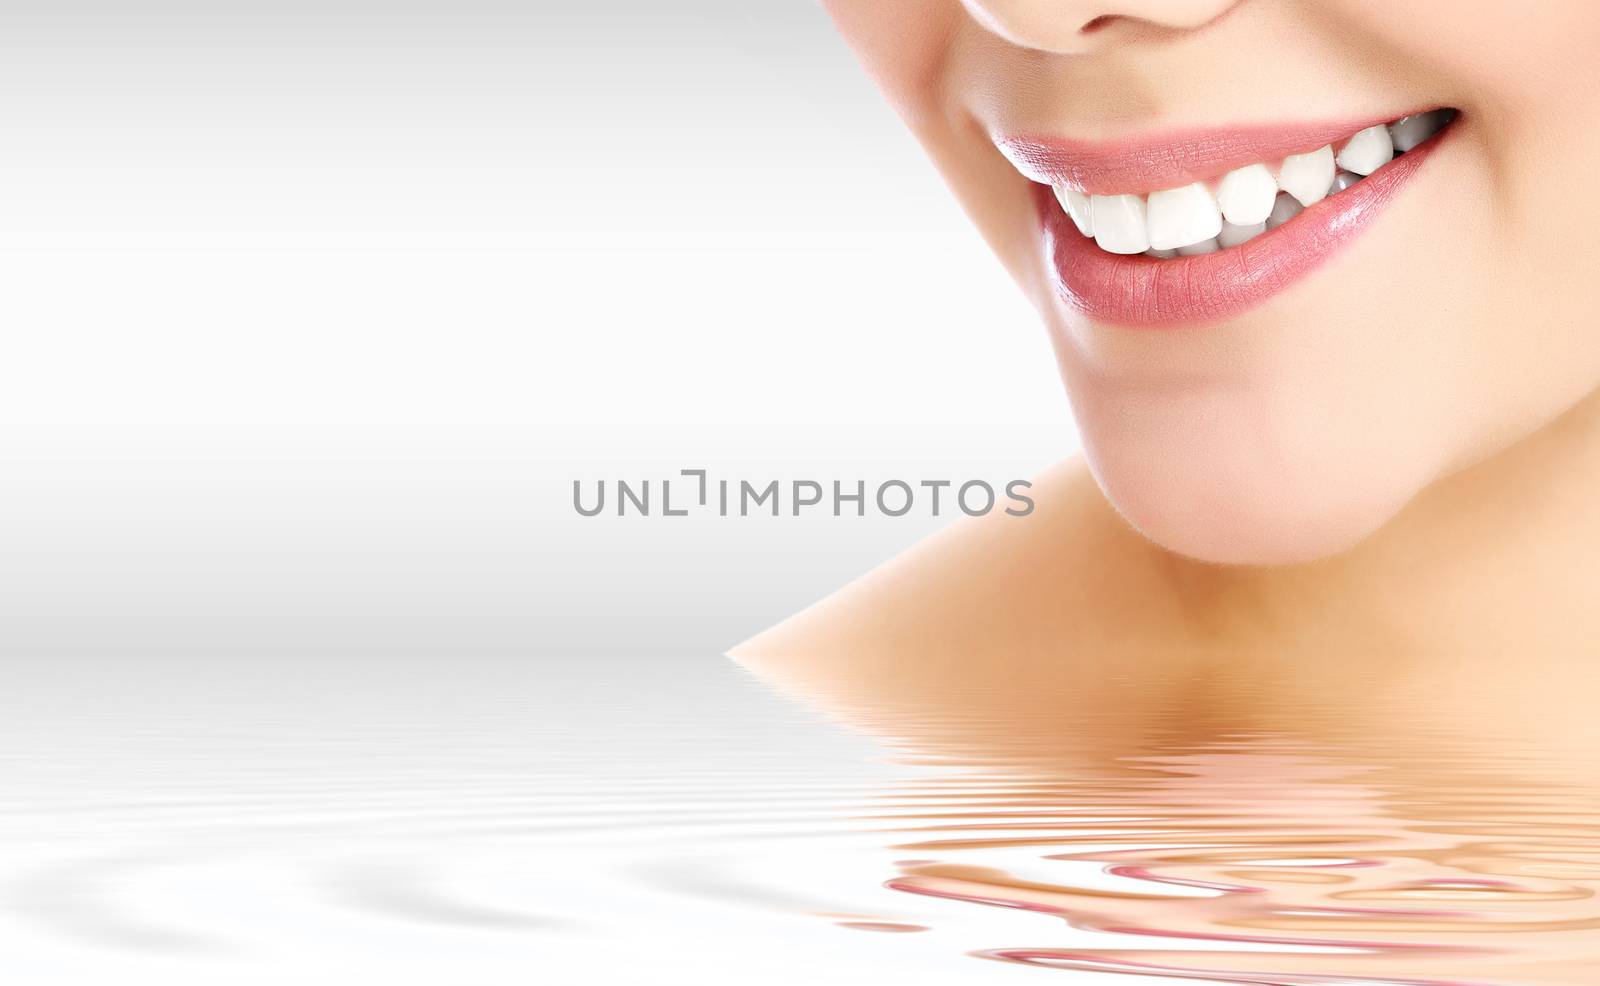 Pretty woman smiling against a grey background with copyspace